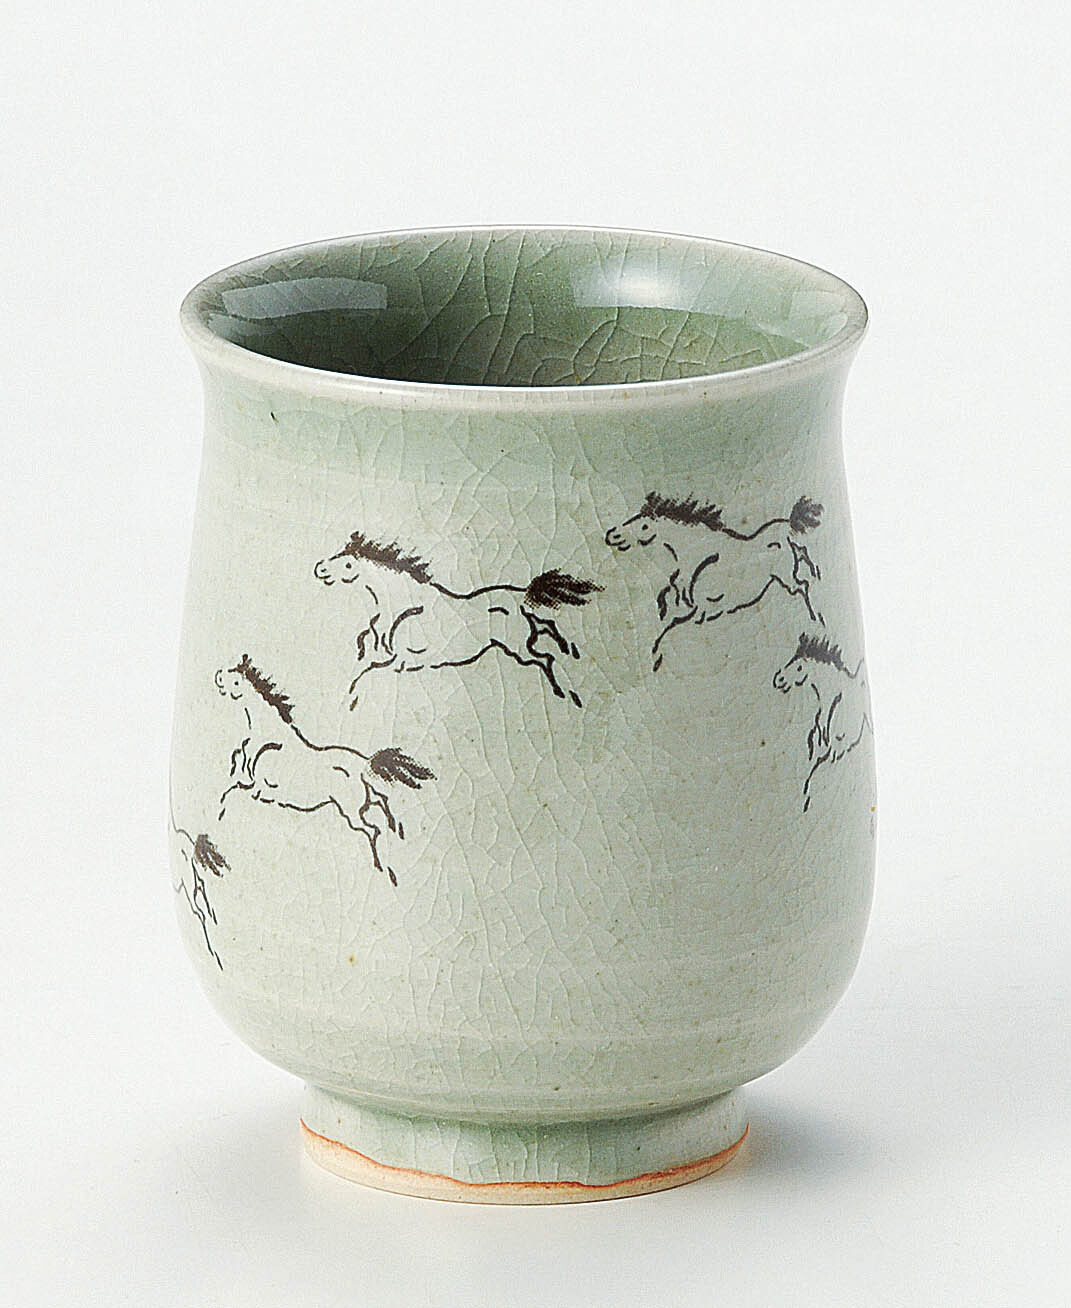 Soma Japanese Tea Cup Made In Japan Pottery Soma Import Japanese Products At Wholesale Prices Super Delivery